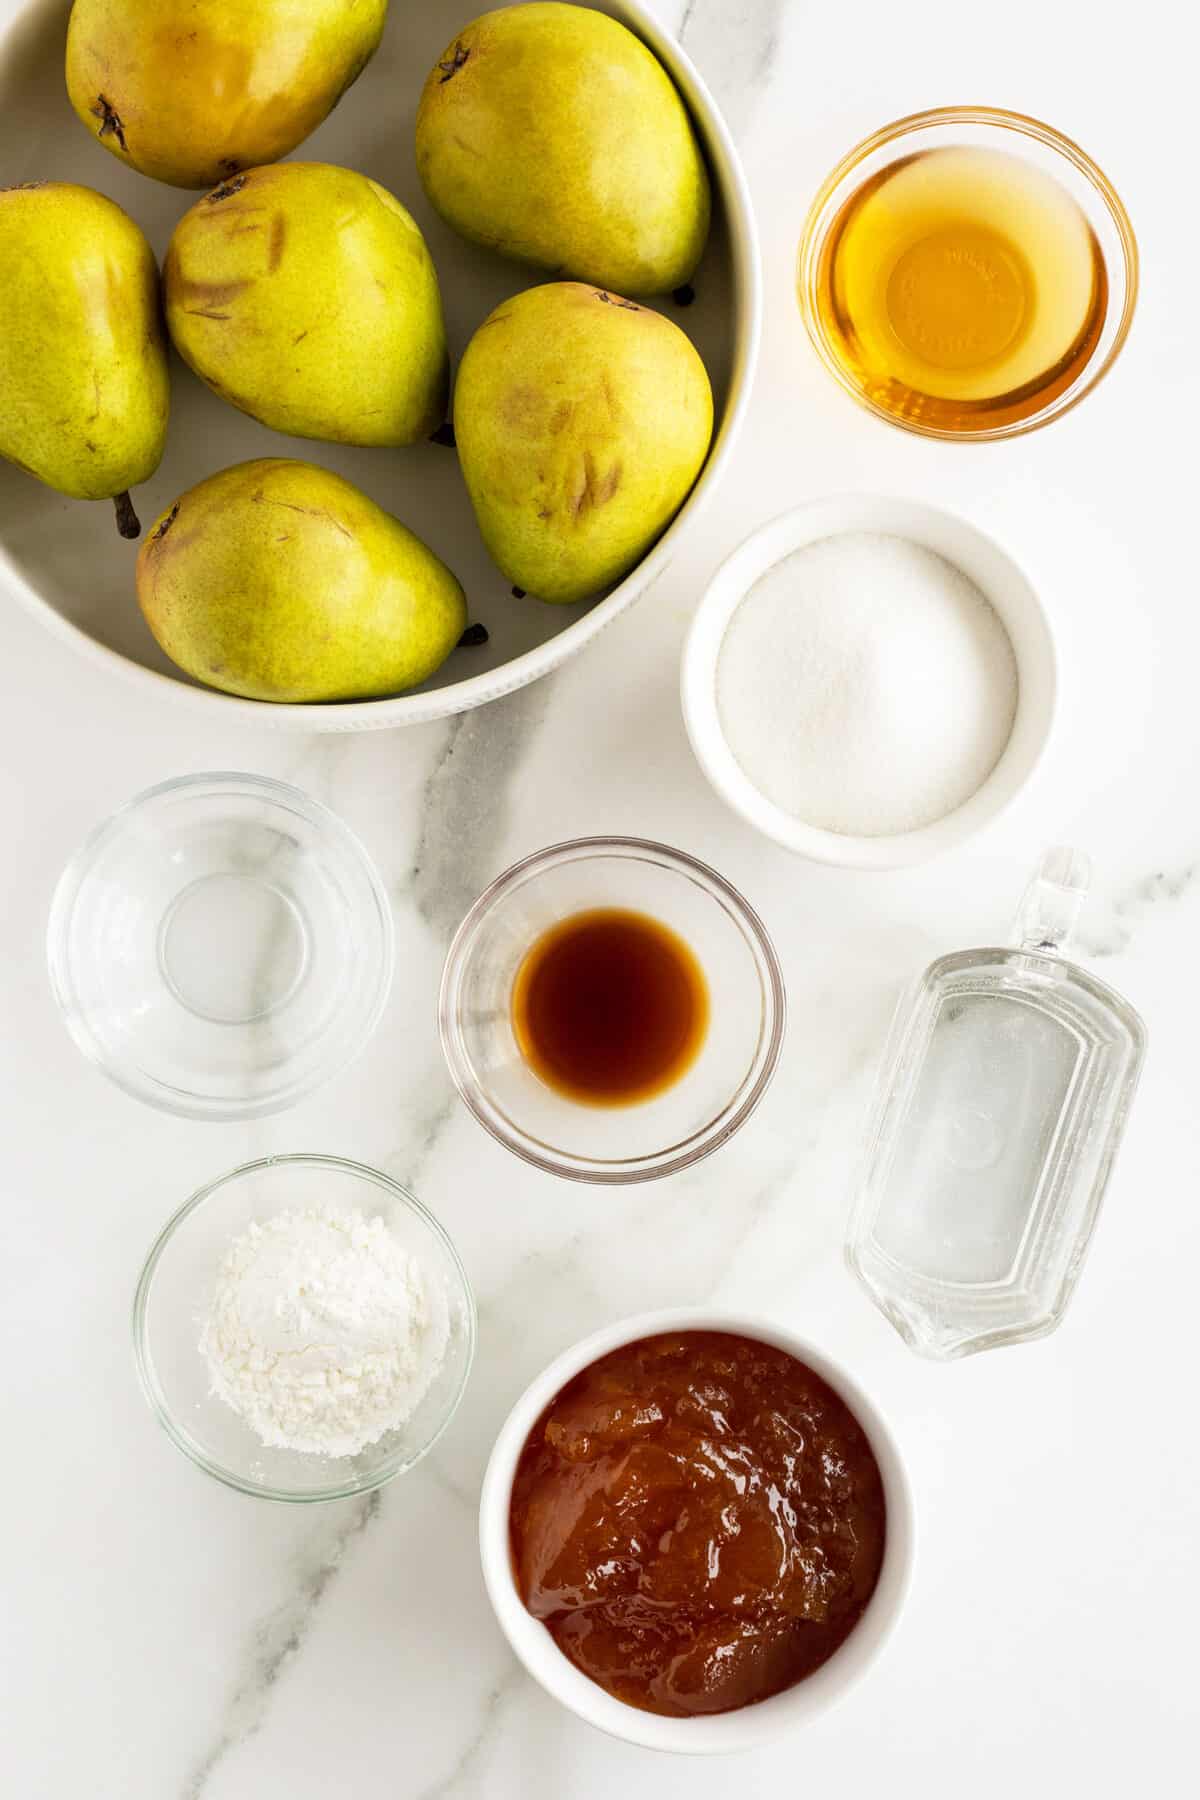 Poached pears ingredients in small white bowls